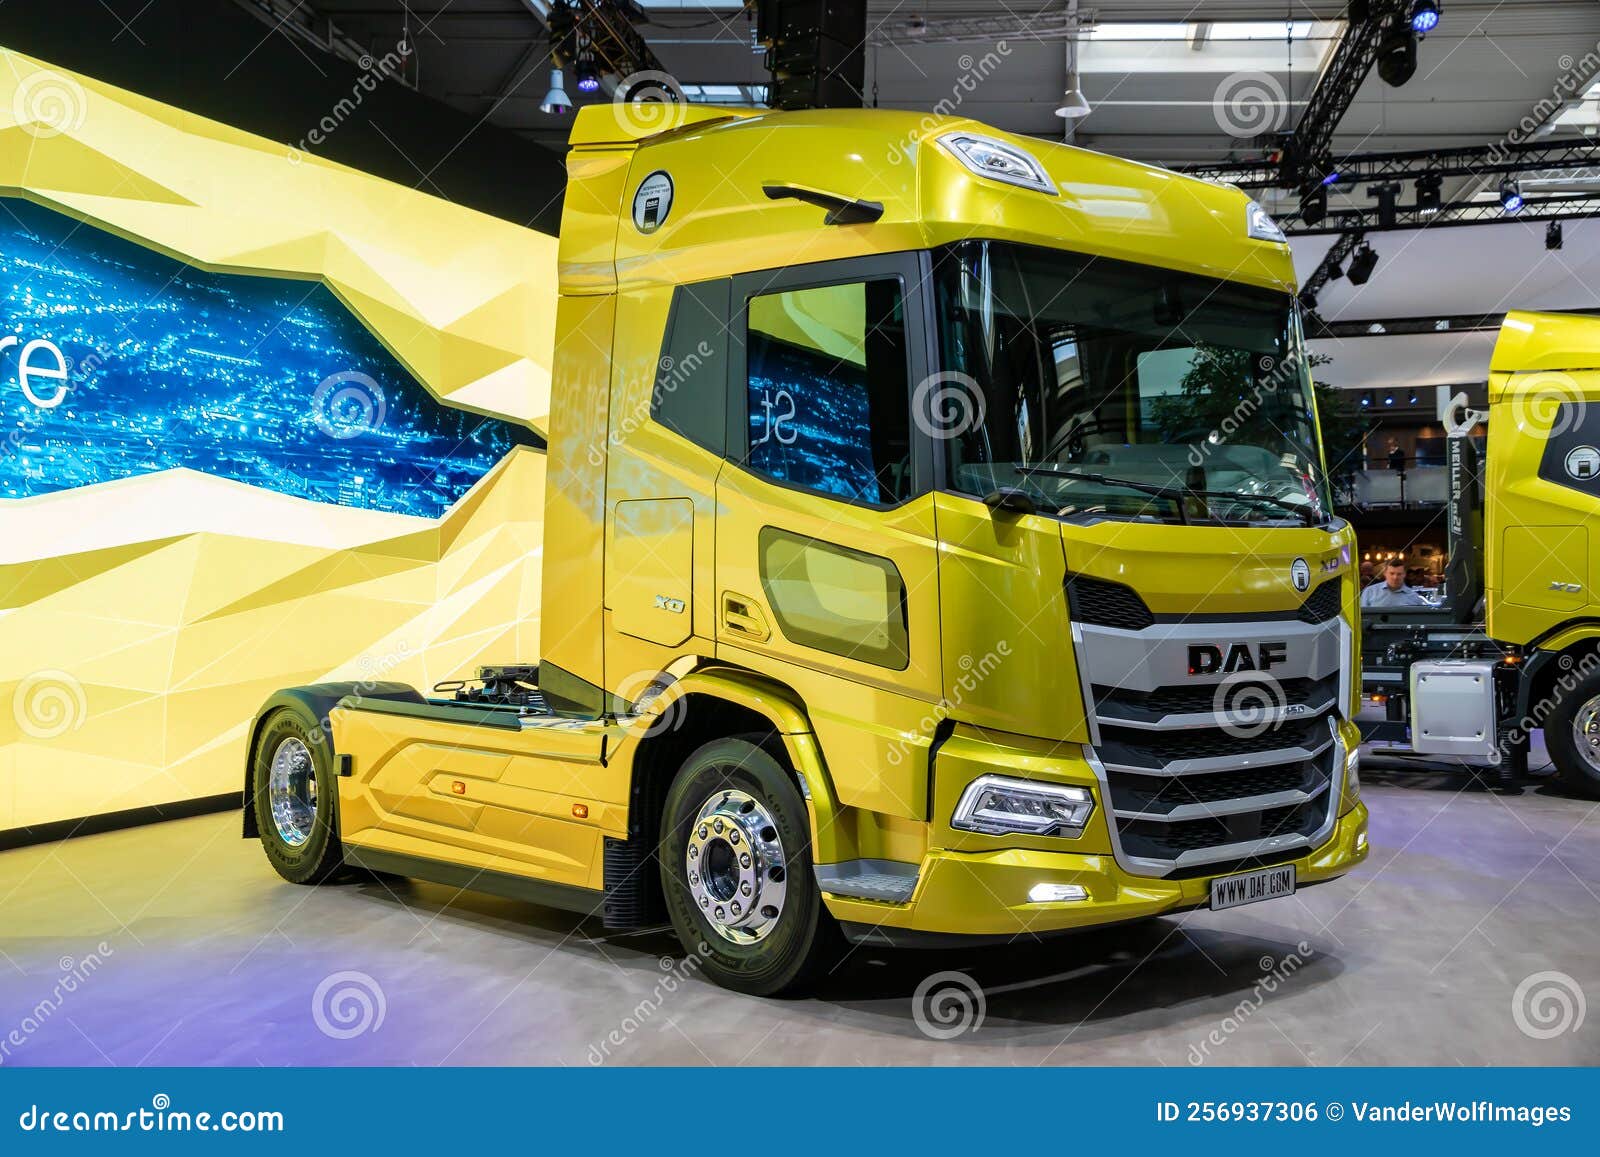 DAF XD Truckat the Hannover IAA Transportation Motor Show. Germany -  September 20, 2022 Editorial Photo - Image of truck, transport: 256937306